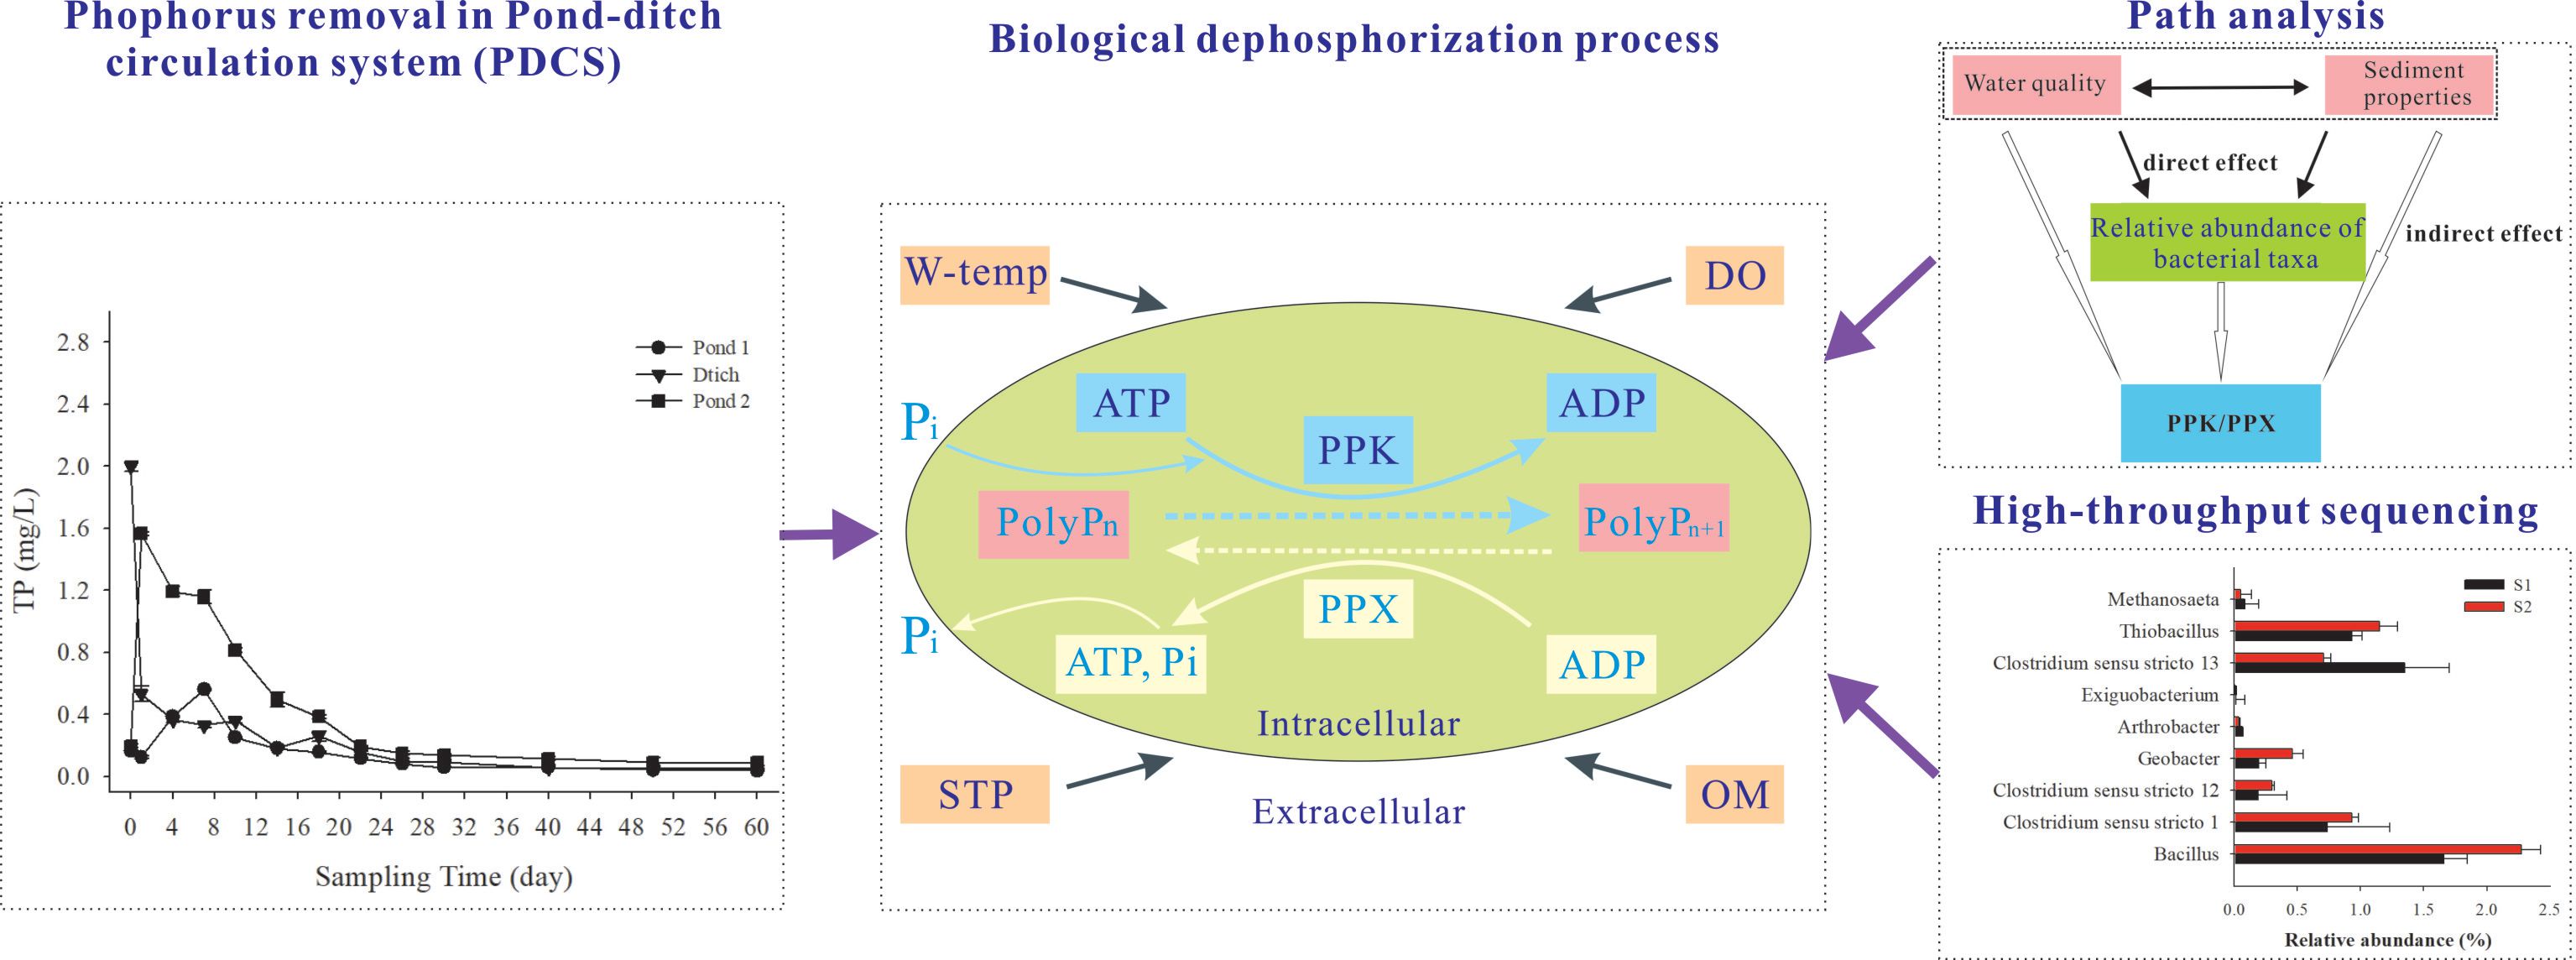 A Schematic diagram of Poly-P metabolism pathway in PDCSs microorganisms (Image by MA Lin )_.jpg